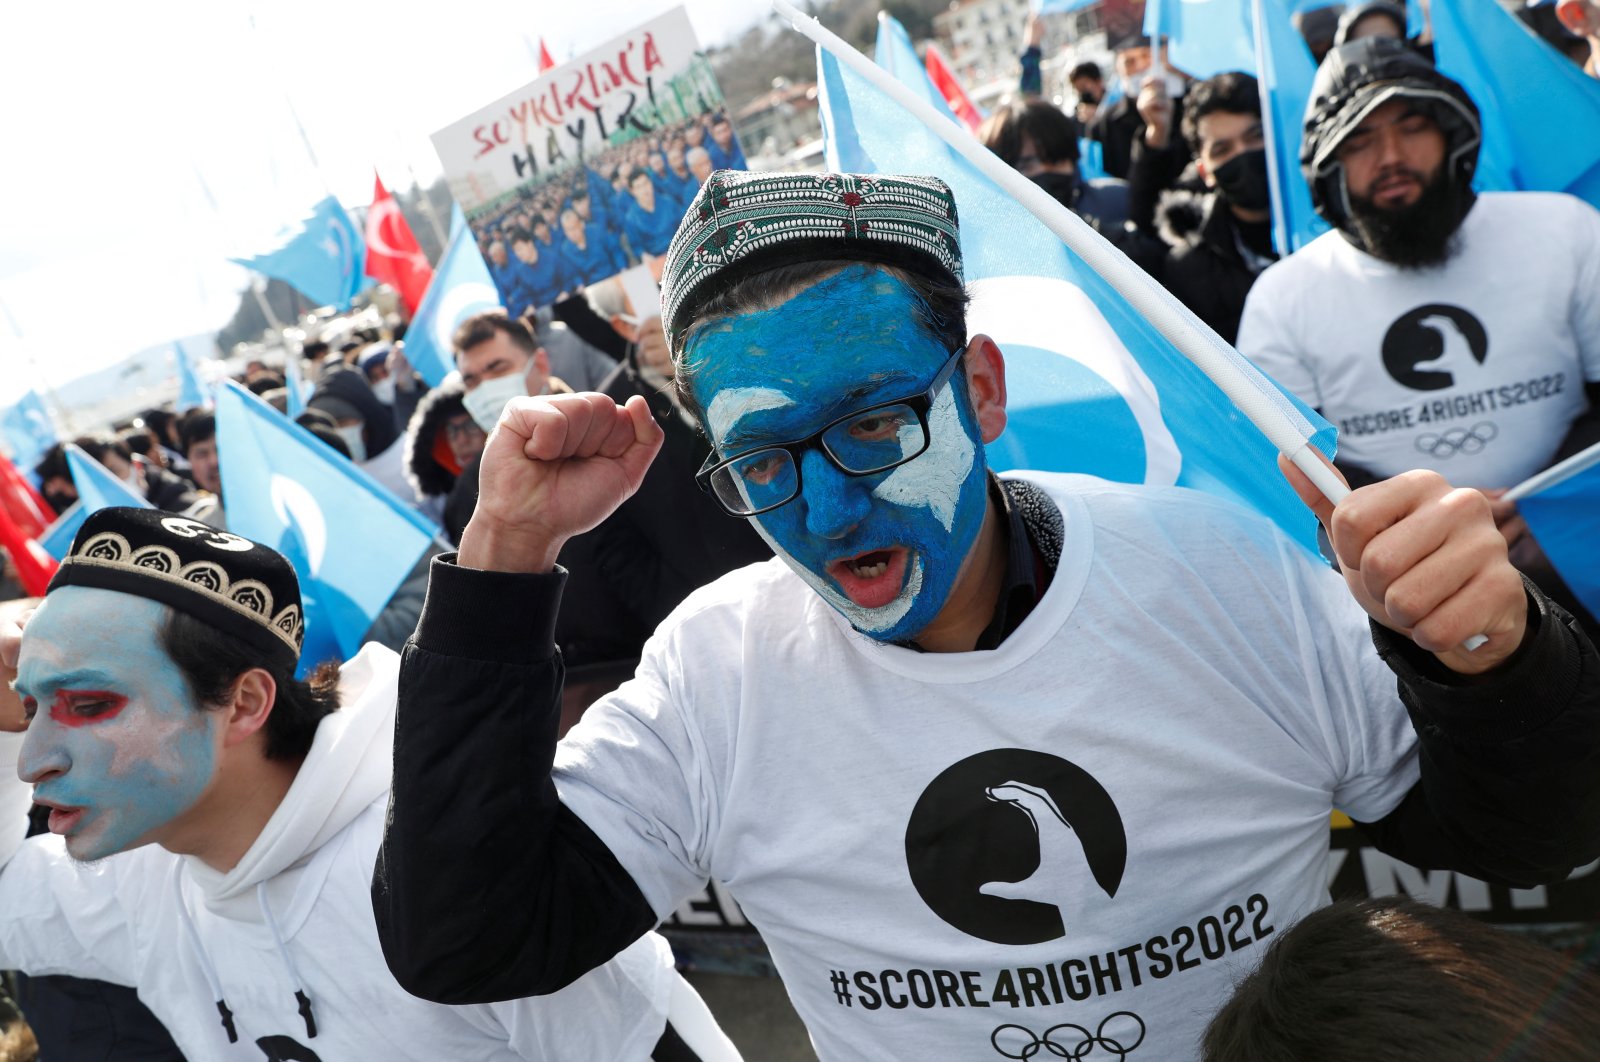 People from China&#039;s Uyghur Muslim ethnic group shout slogans during a rally against the 2022 Beijing Winter Olympic Games over China&#039;s treatment of the minority, Istanbul, Turkey, Feb. 4, 2022. (Reuters Photo)